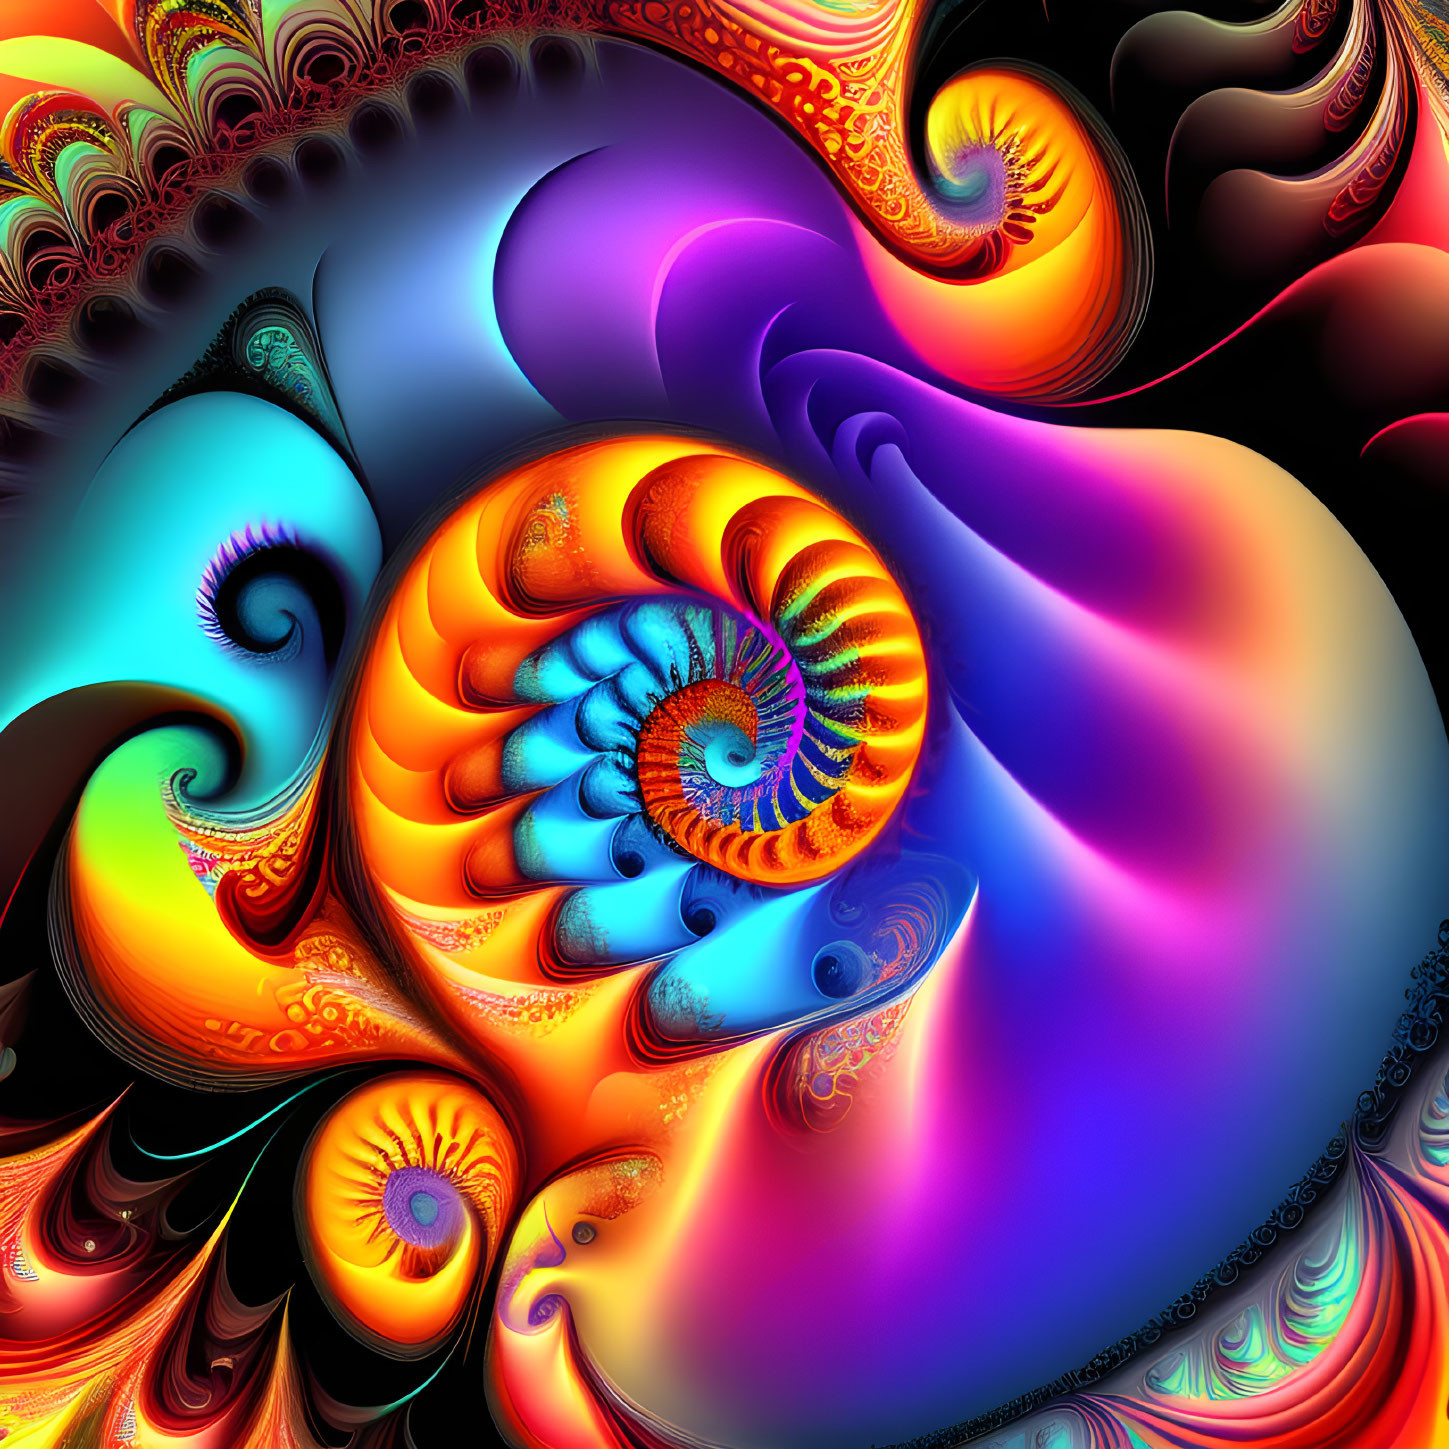 Colorful Abstract Fractal Design with Swirling Blue, Orange, and Pink Patterns